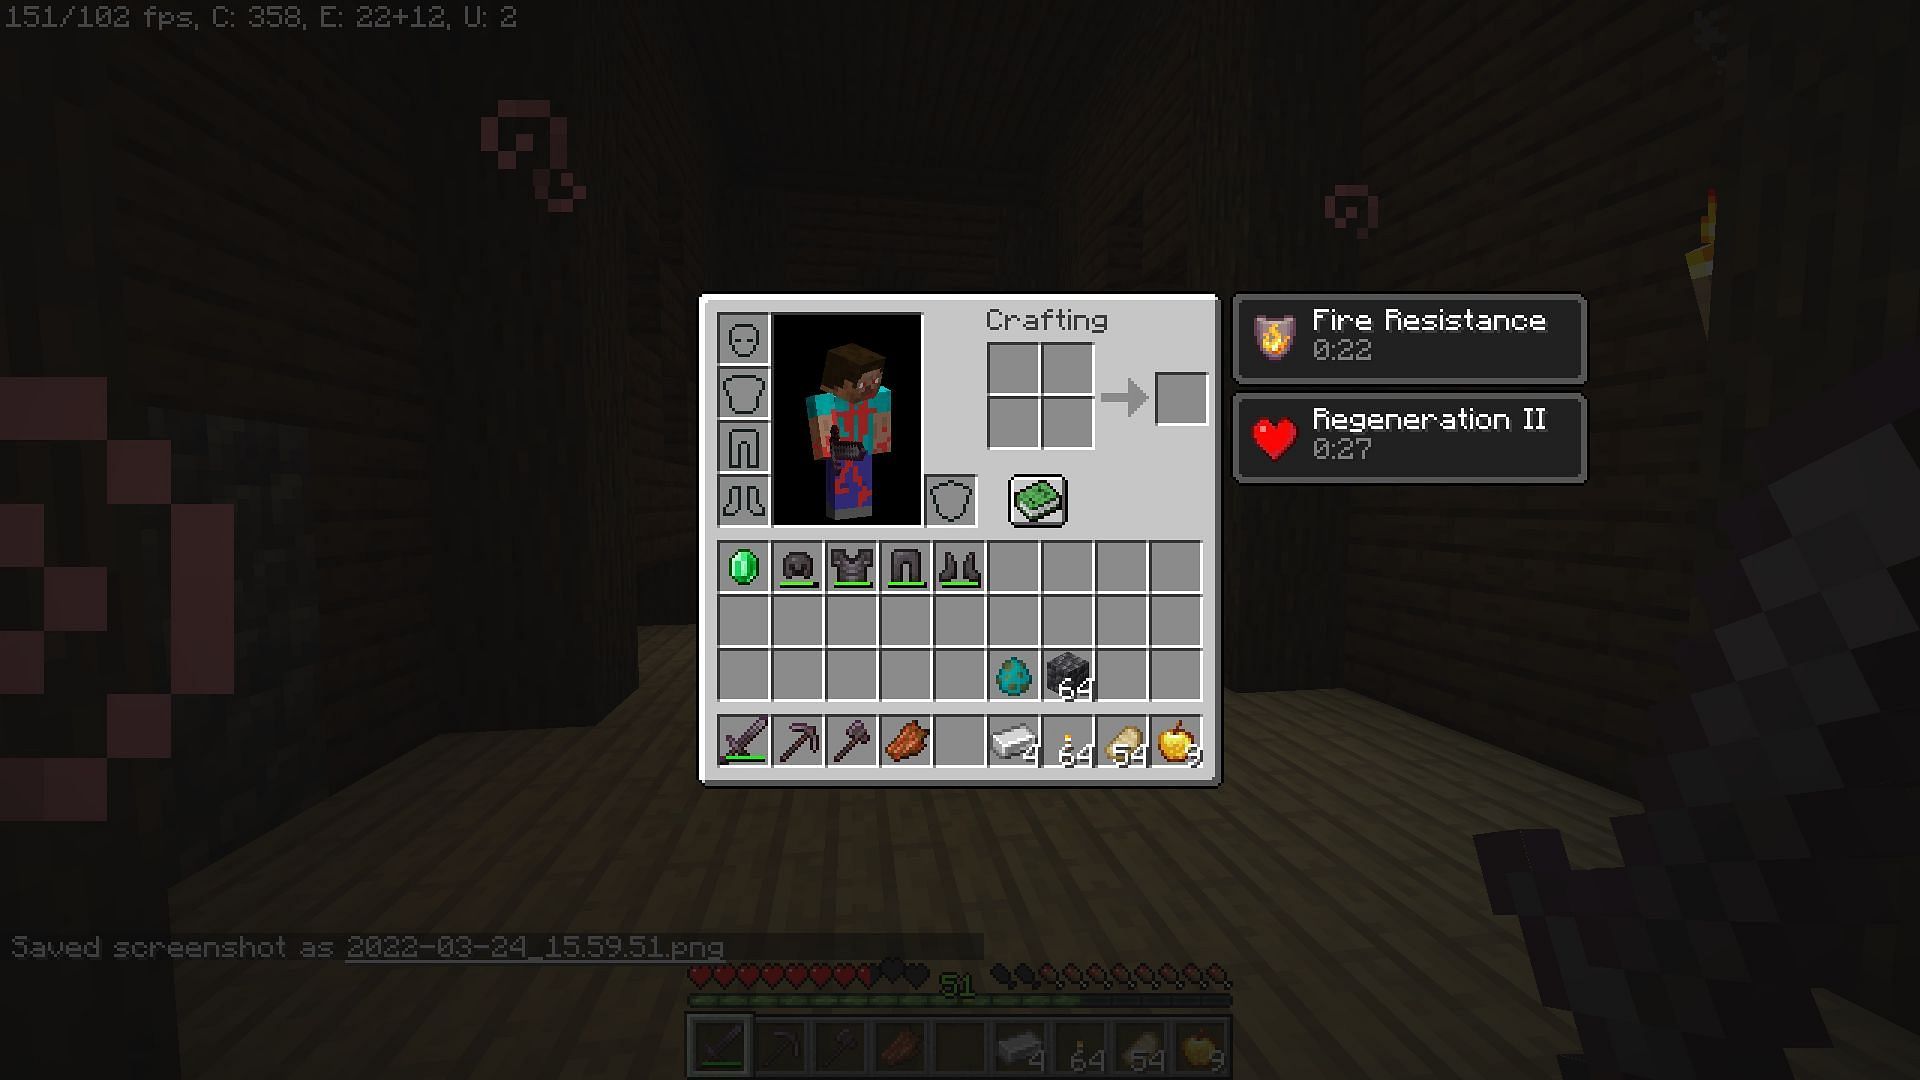 Regeneration and Fire resistance remain for 40 seconds (Image via Mojang Studios)